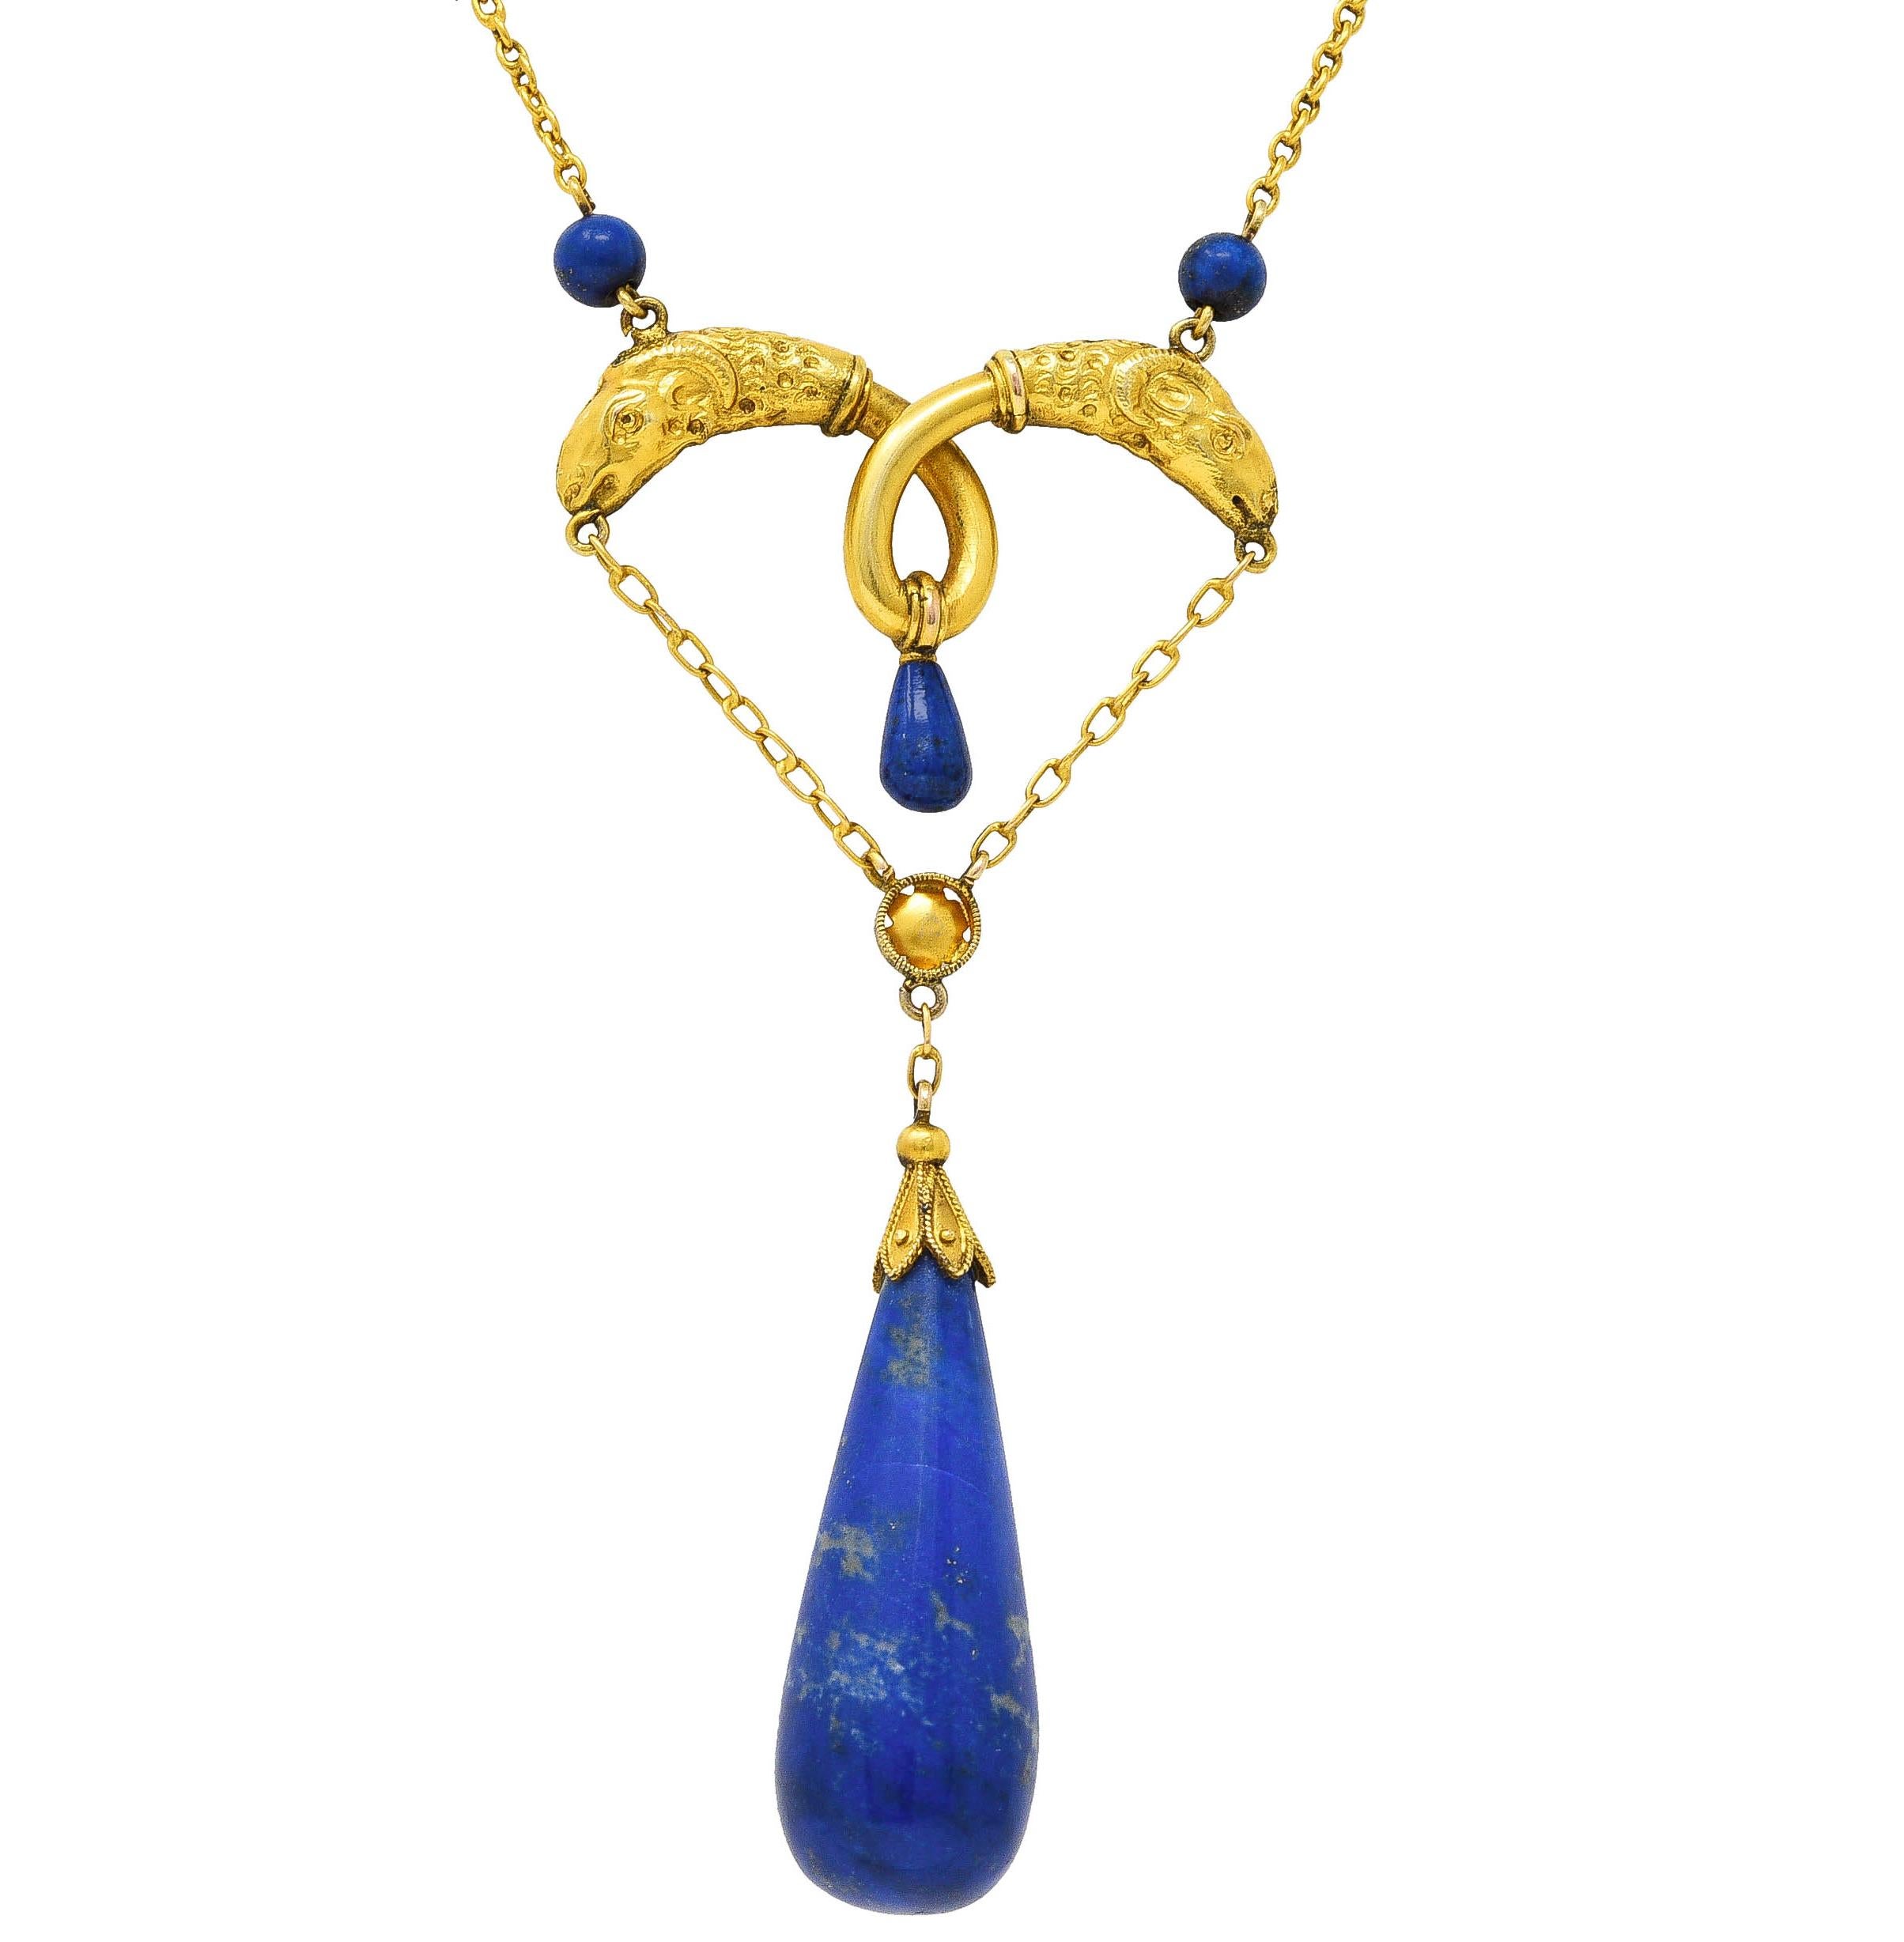 Victorian Etruscan Revival Lapis Lazuli 14 Karat Yellow Gold Swagged Necklace For Sale 2